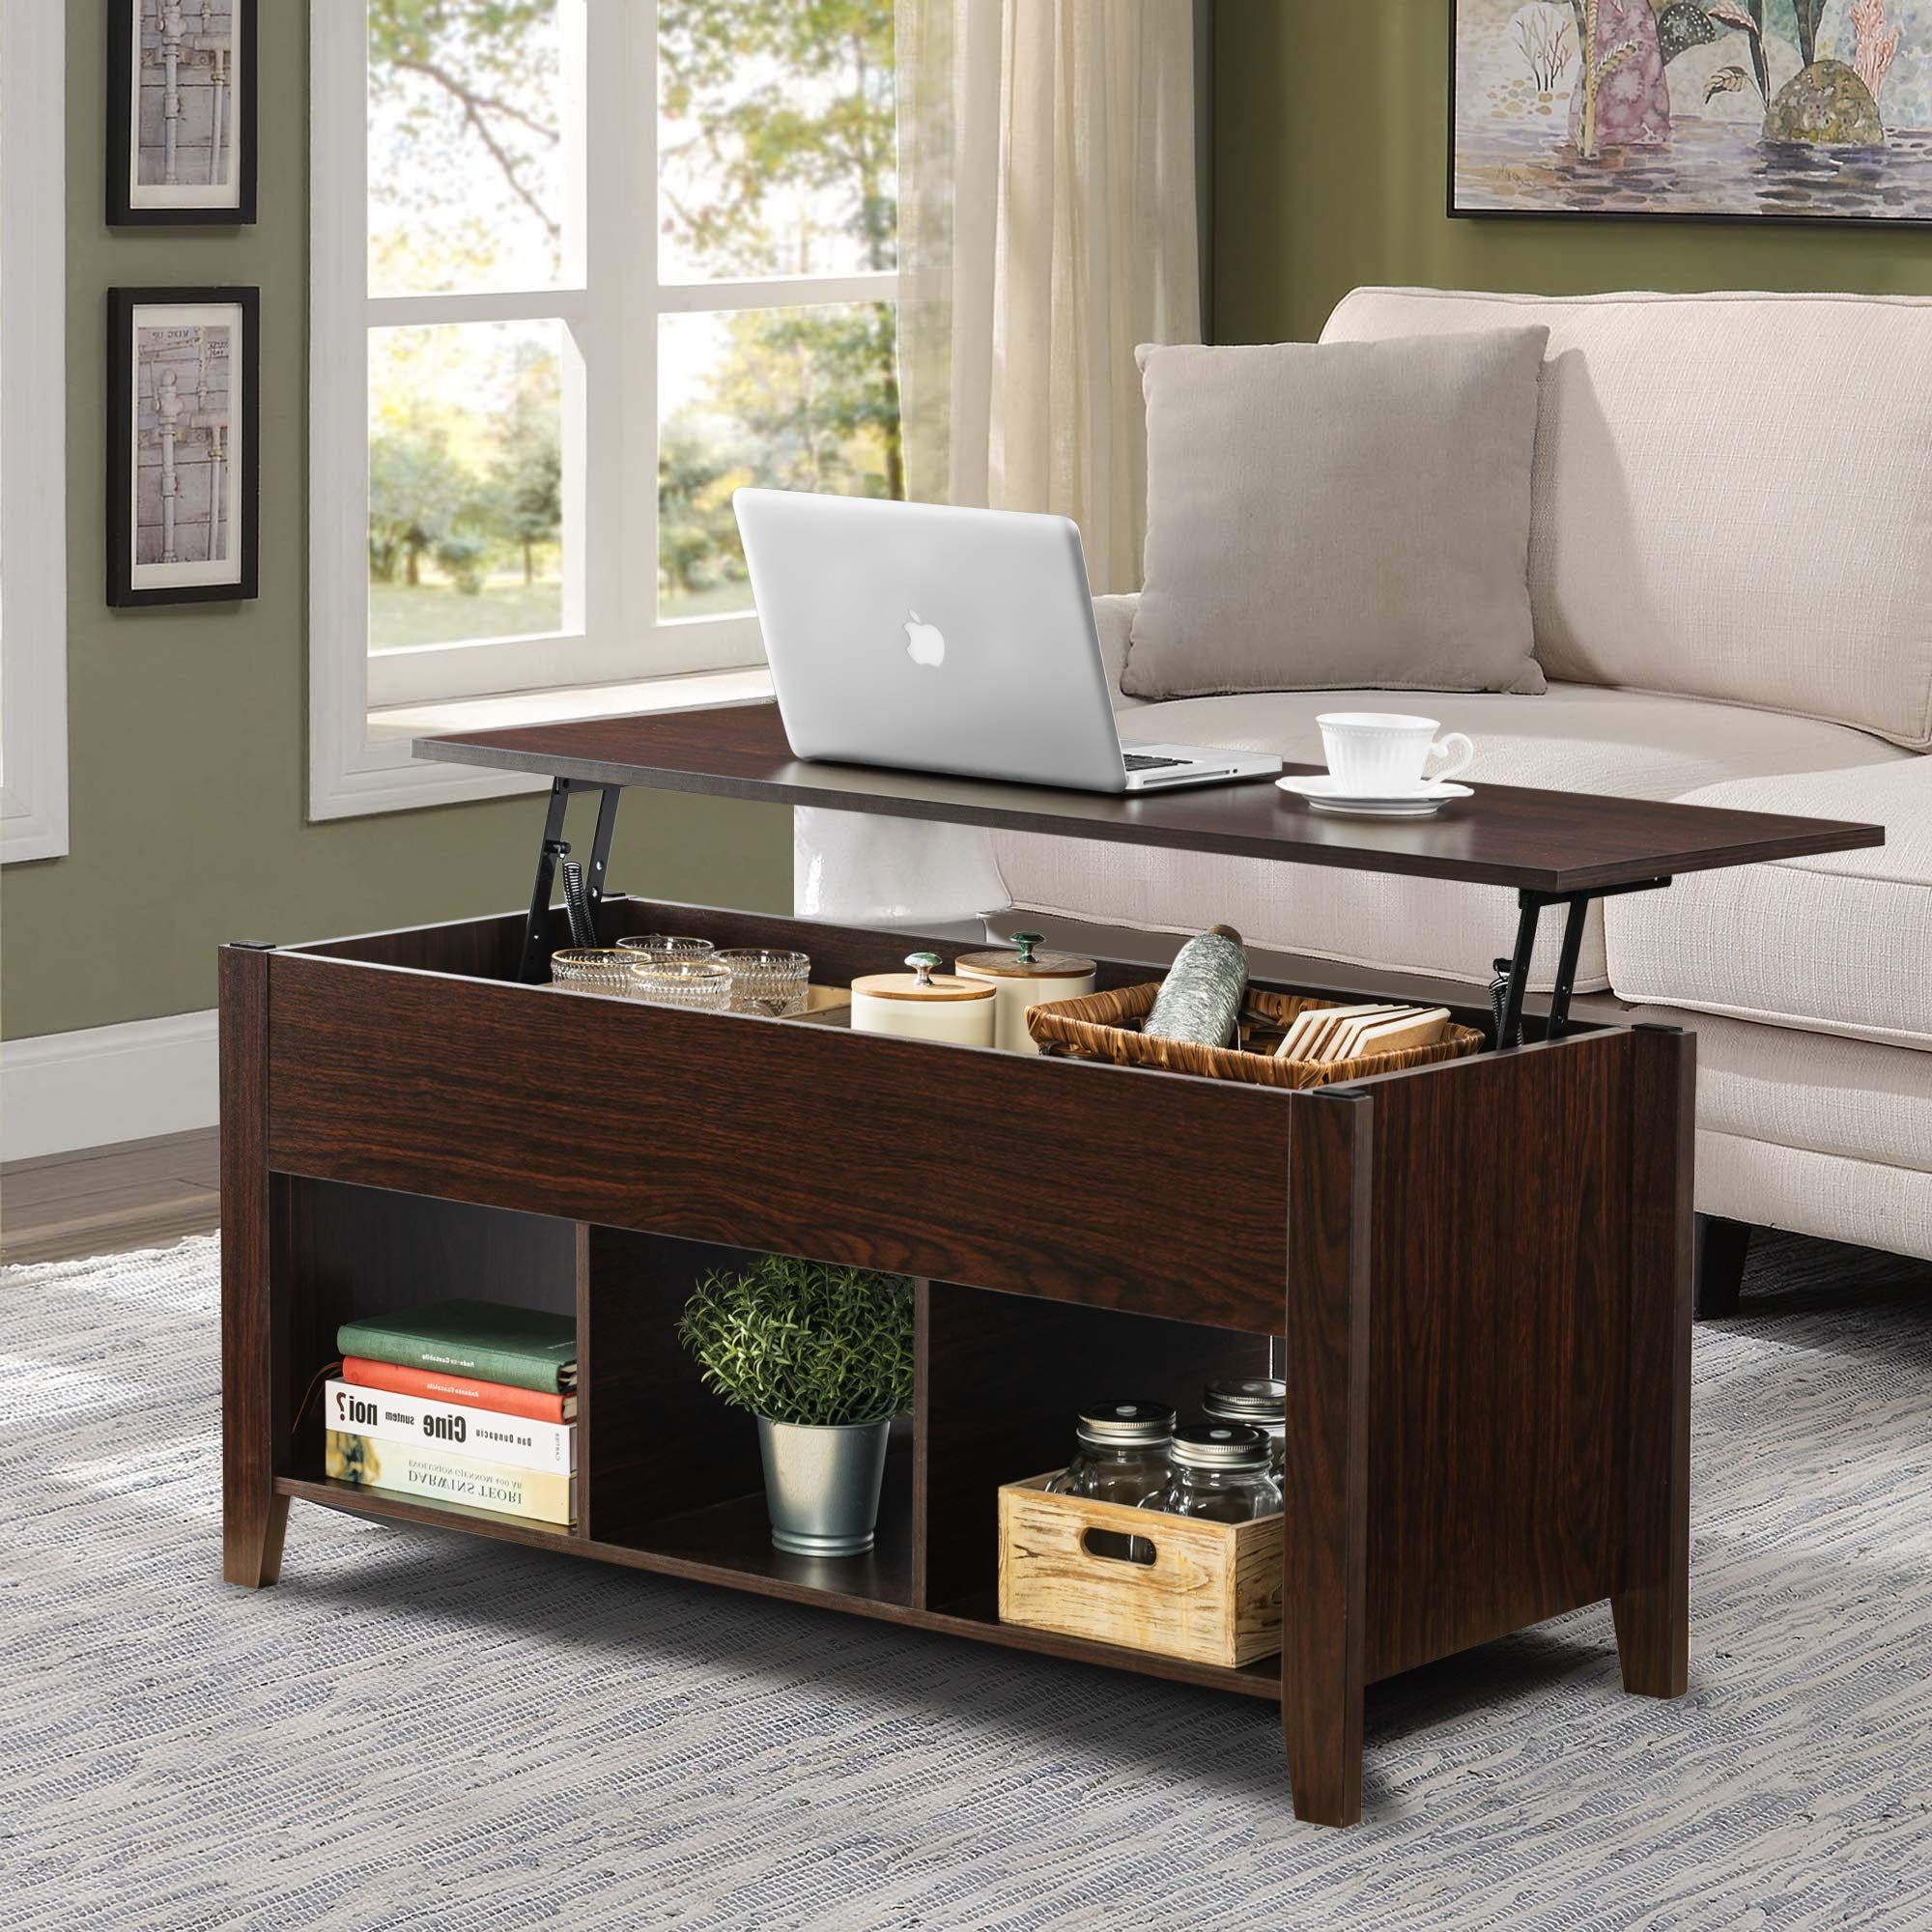 Most Popular Buy Choochoo Lift Top Coffee Table W/hidden Storage Compartment And 3 In Lift Top Coffee Tables With Hidden Storage Compartments (View 3 of 15)